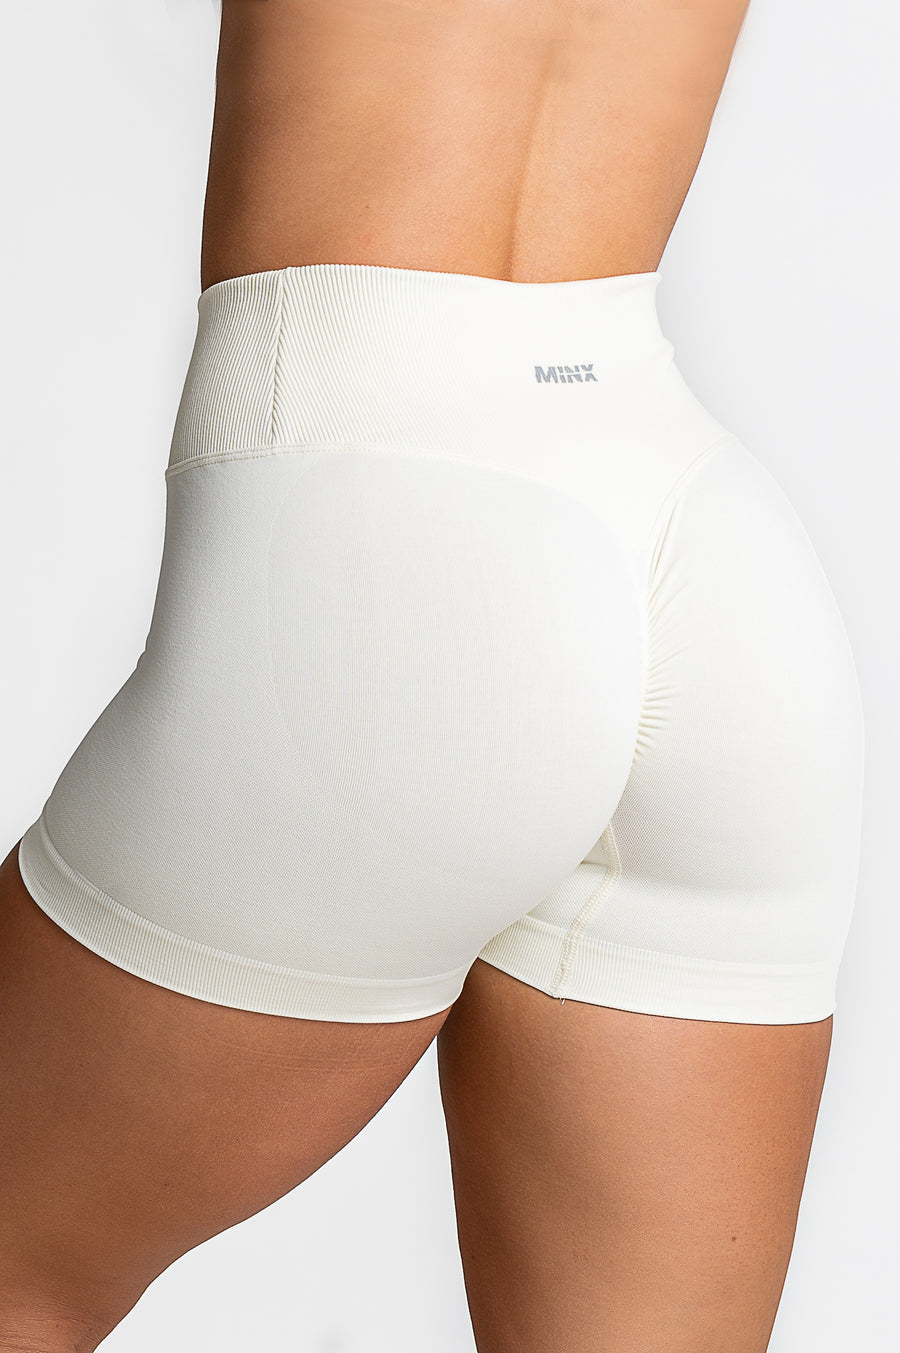 You Want the V Scrunch Butt Booty Shorts - White